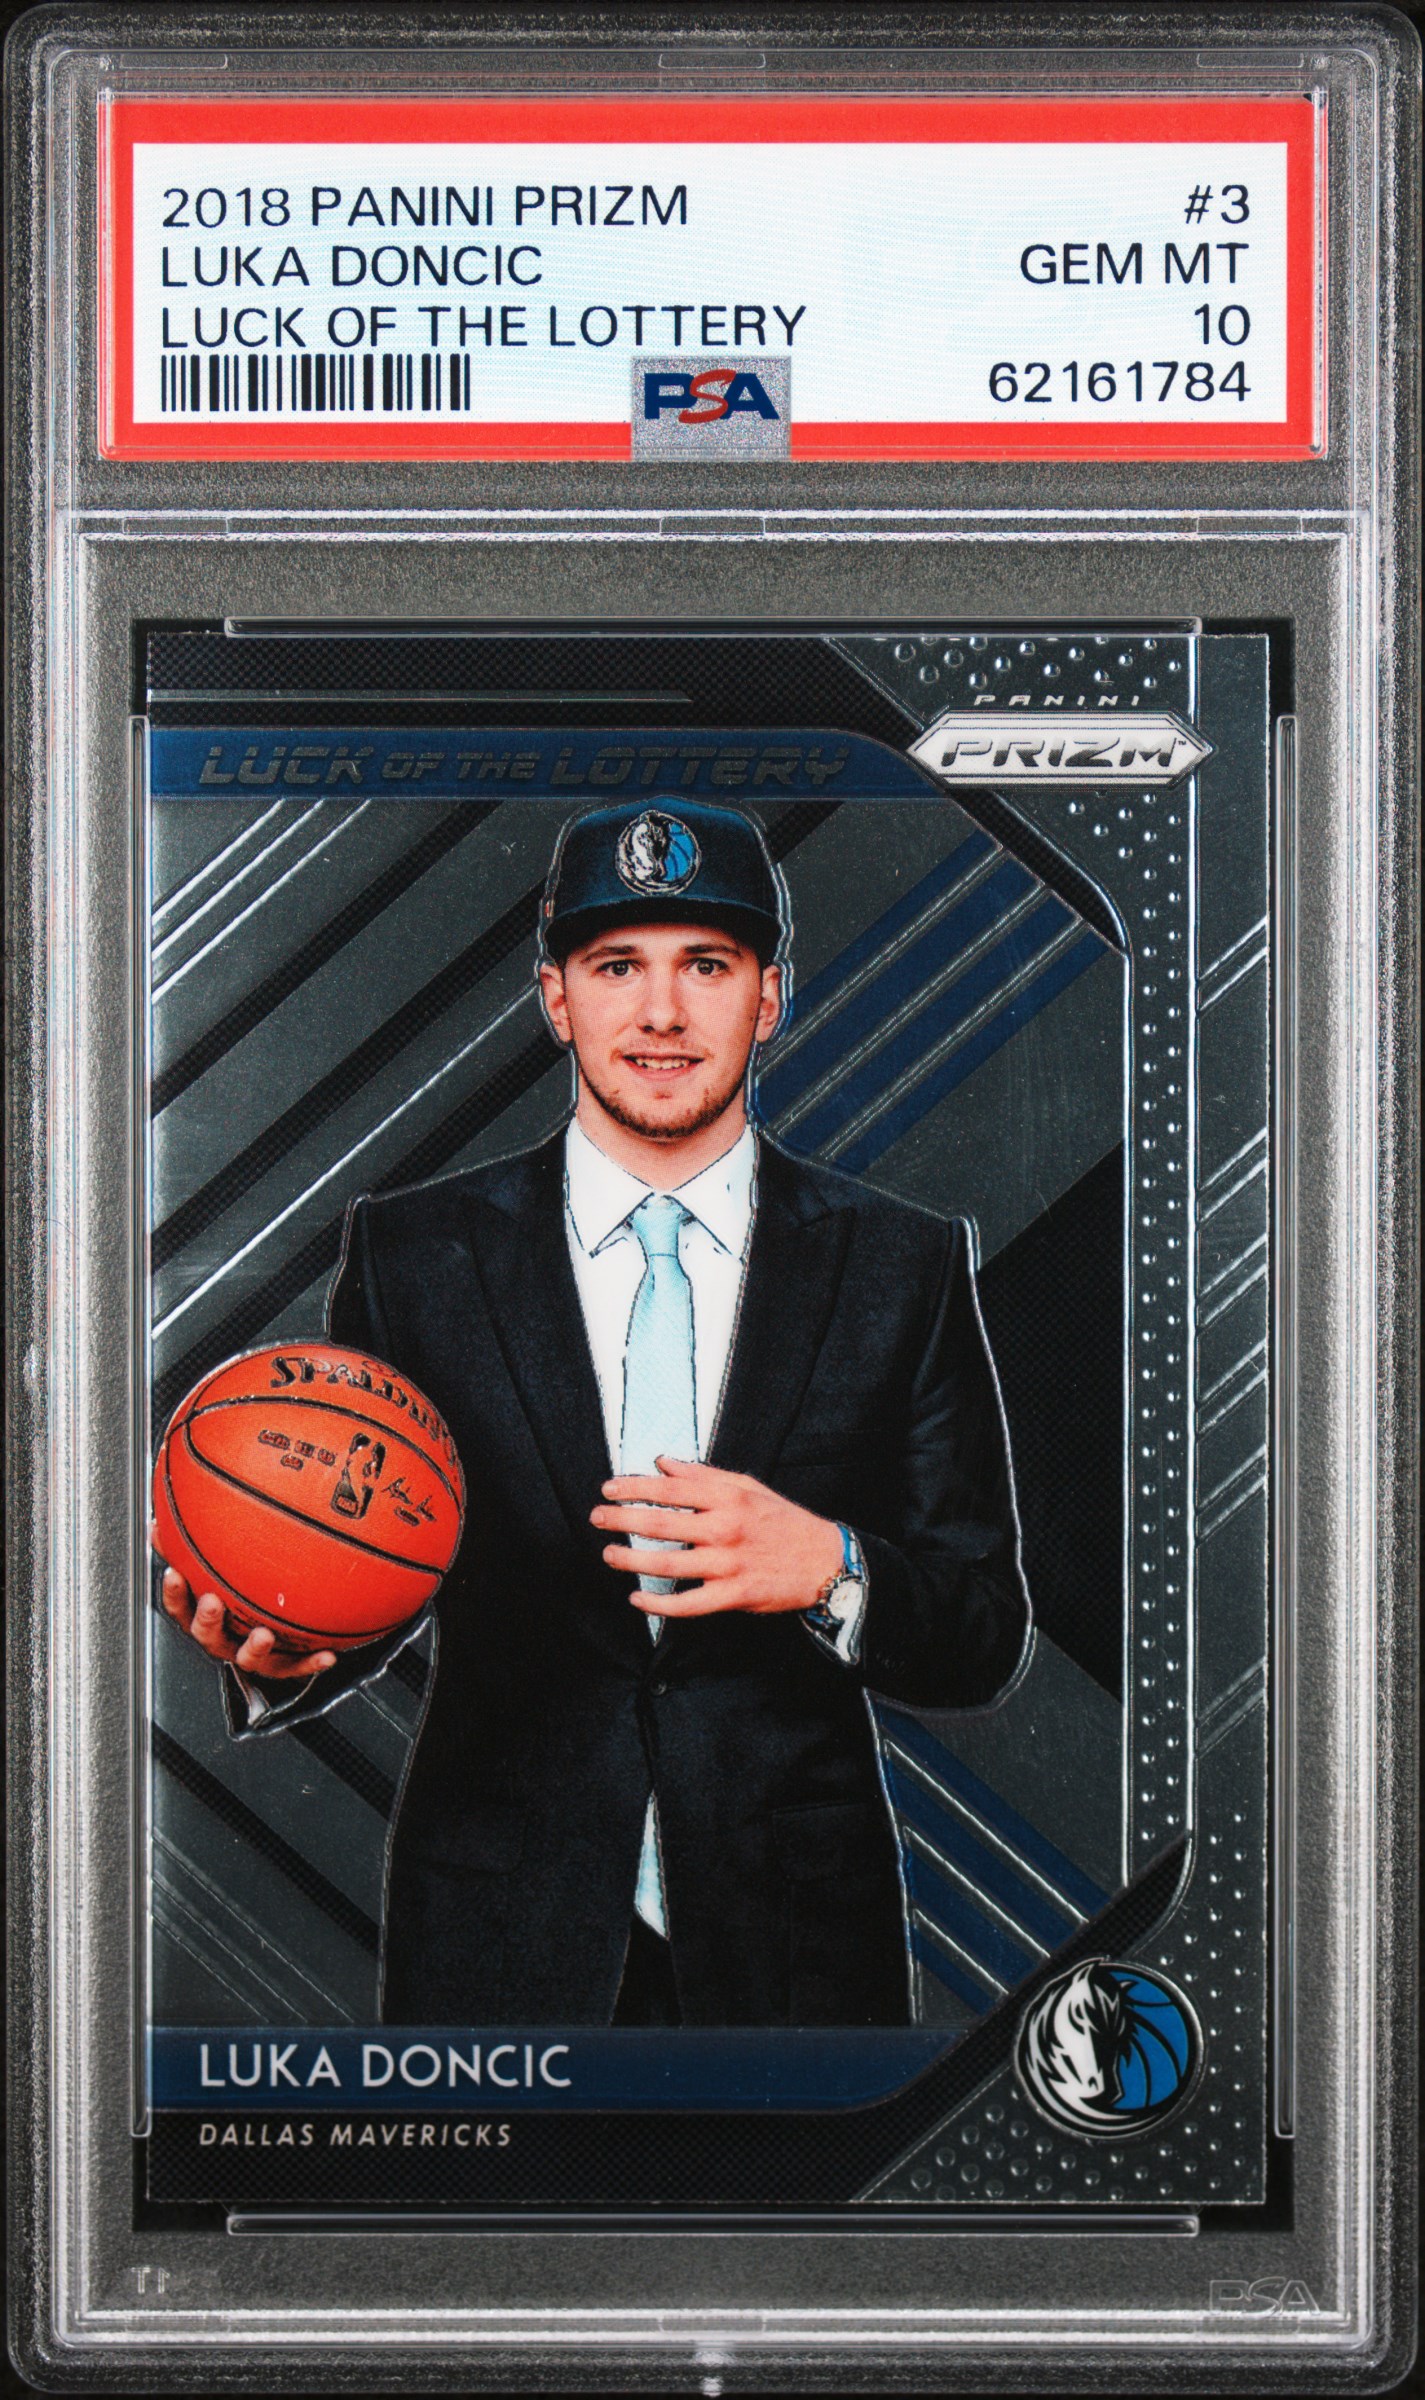 2018 Panini Prizm Luck Of The Lottery #3 Luka Doncic Rookie Card – PSA GEM MT 10